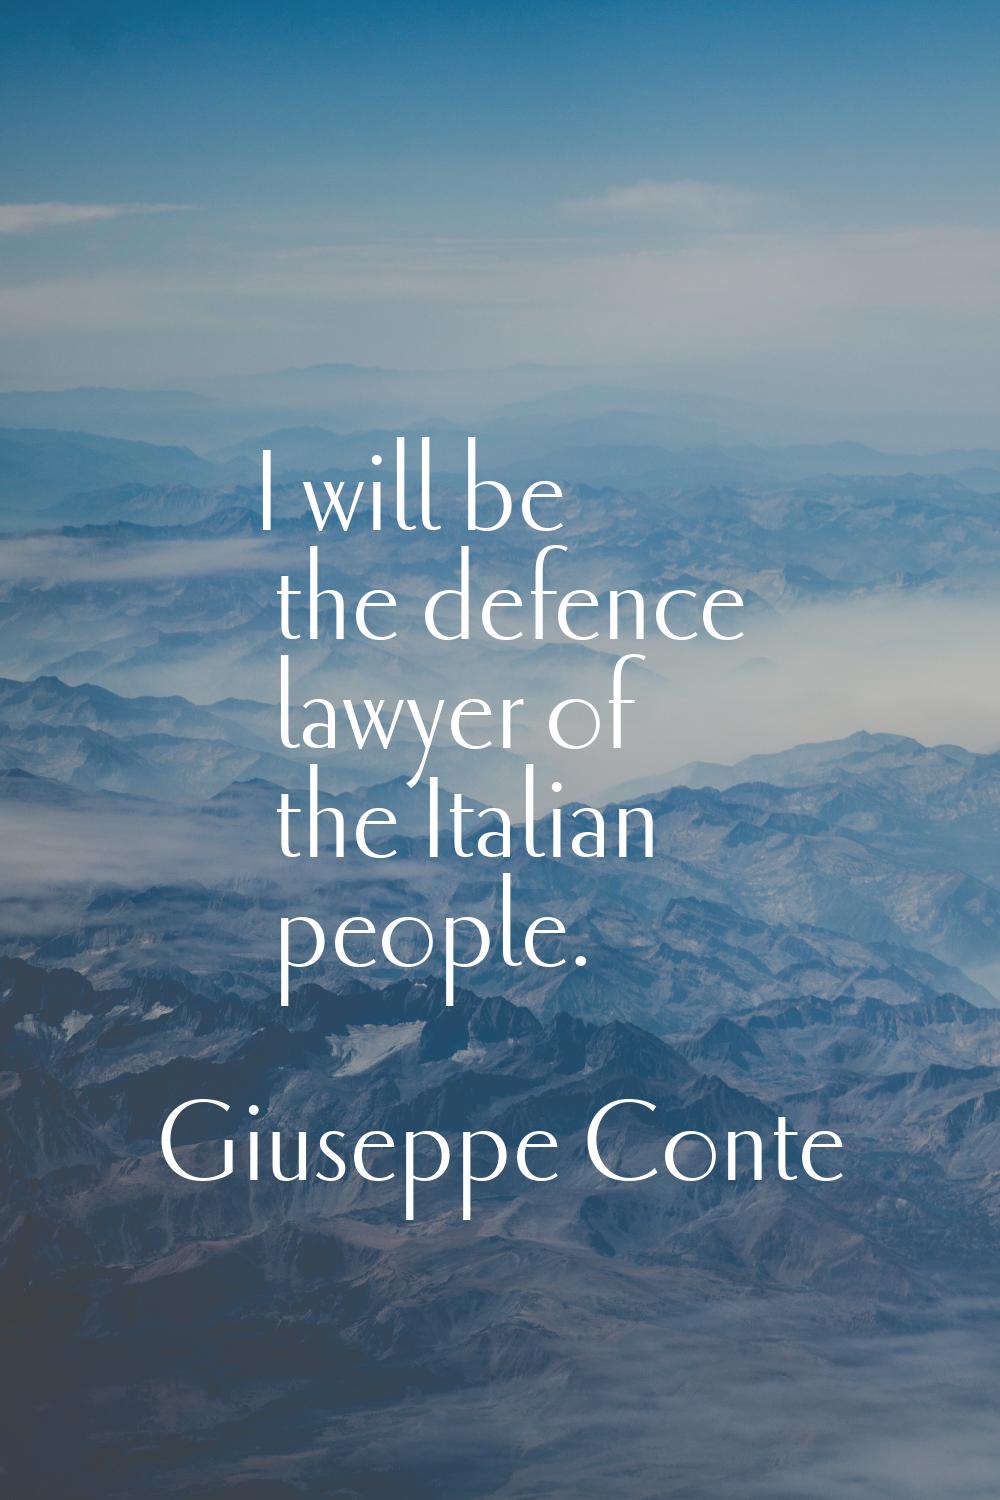 I will be the defence lawyer of the Italian people.